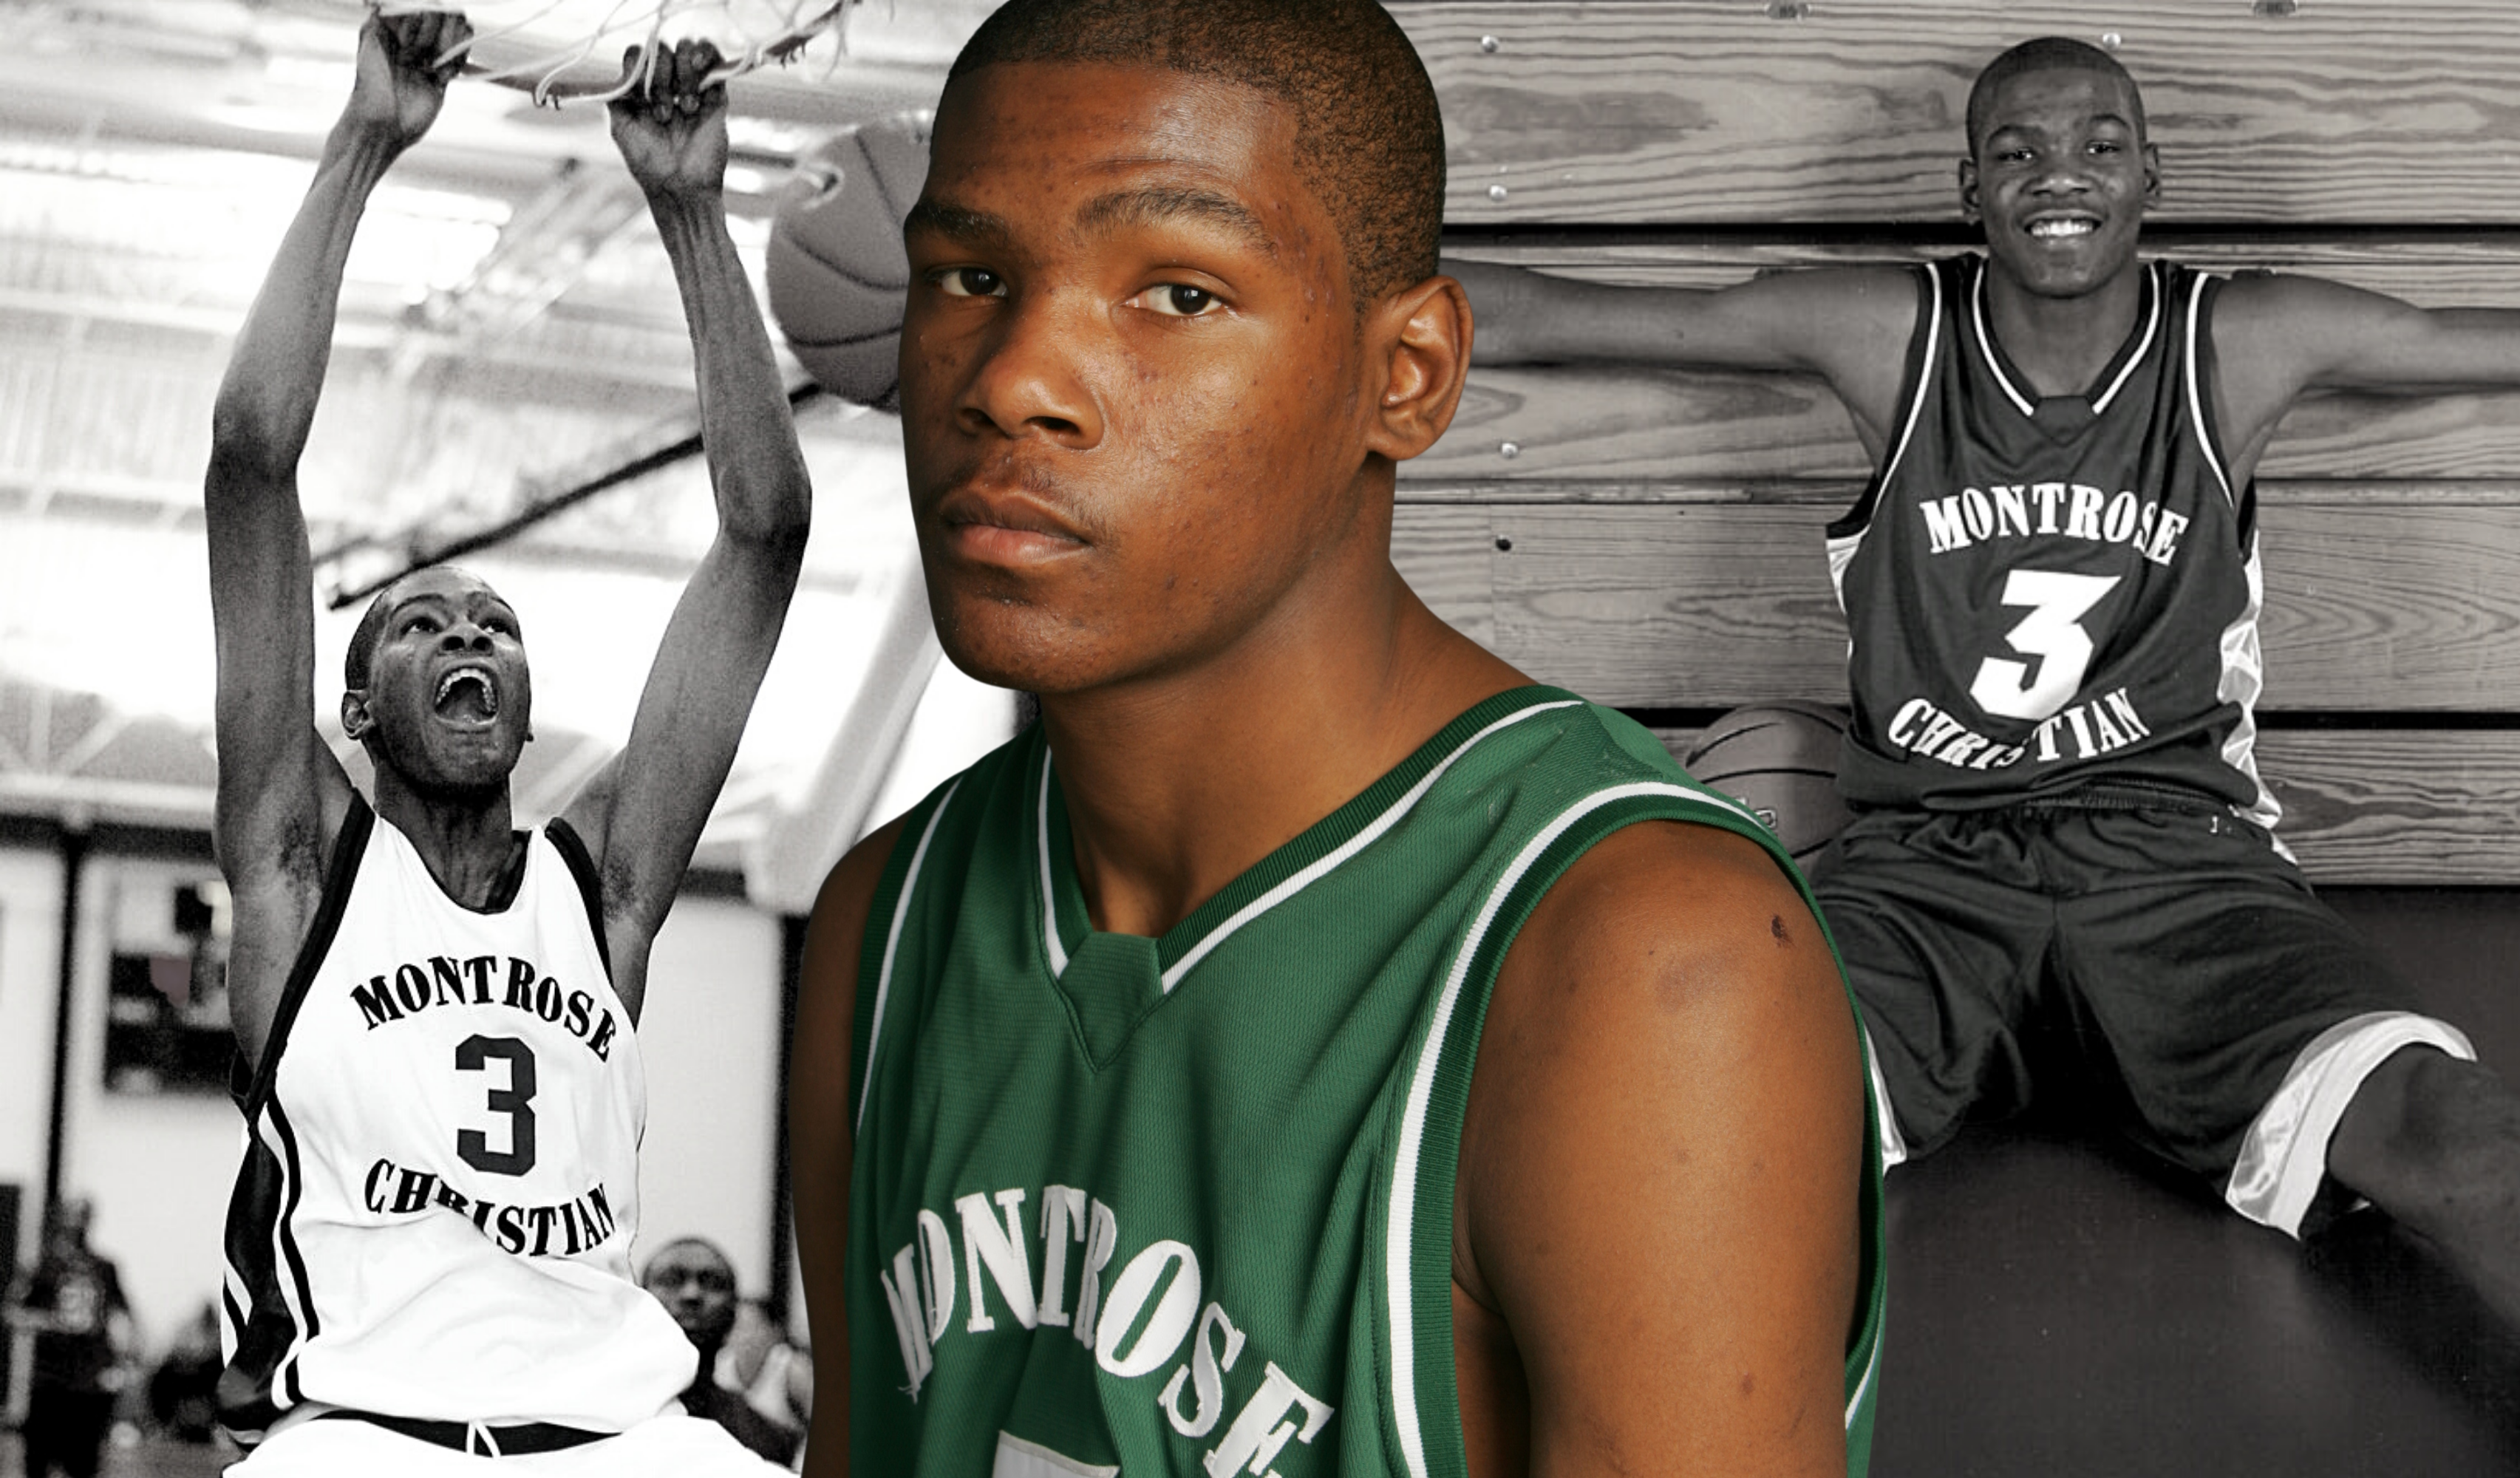 Kevin Durant High School Jersey Headed for IPO at Collectable - Boardroom